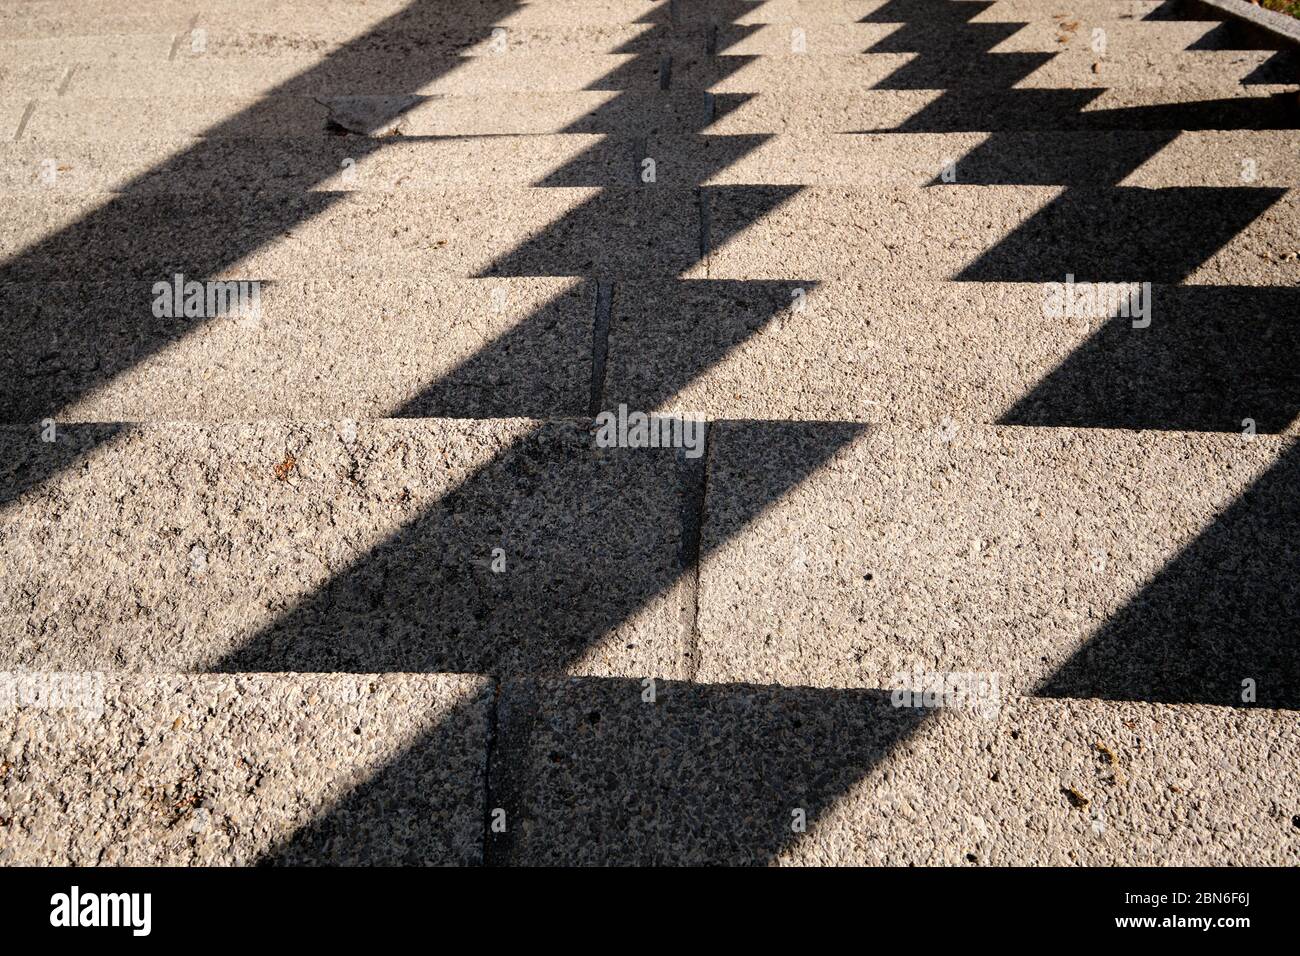 Abstract background shot with a pattern created by harsh shadows on a concrete staircase in the city. Seen in Germany in May. Stock Photo